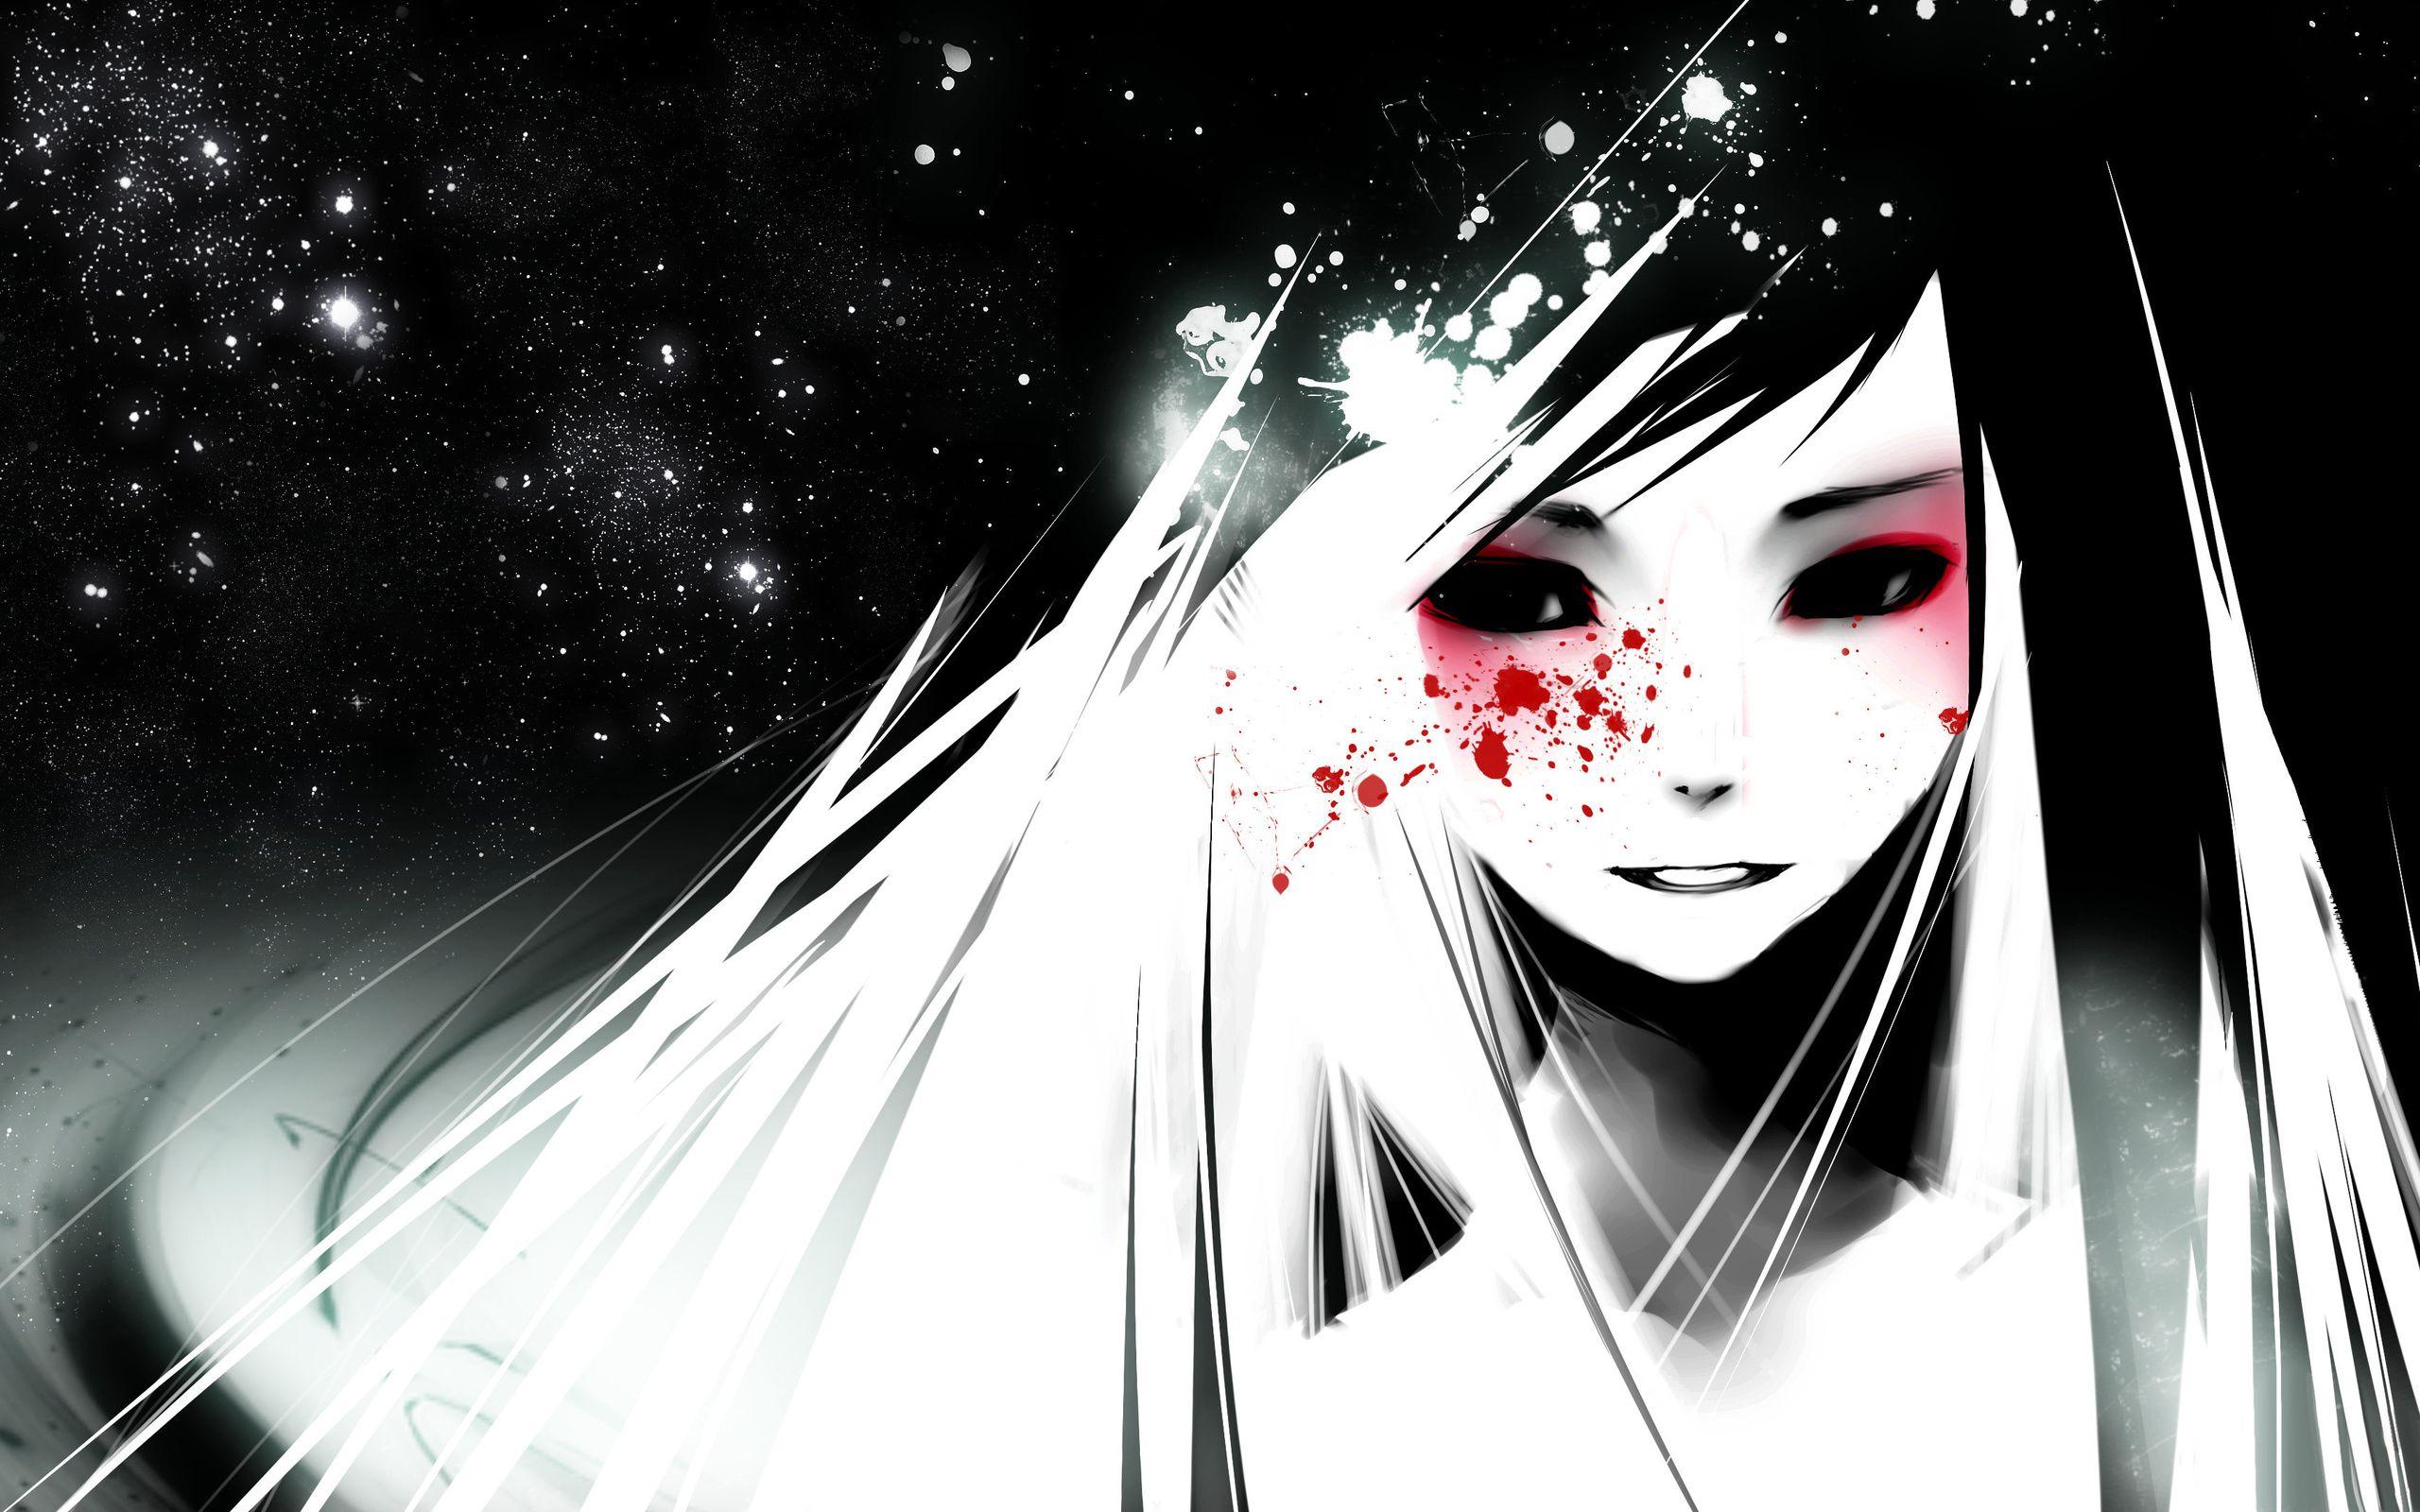 Horror Anime Wallpapers - Top 30 Best Horror Anime Wallpapers Download